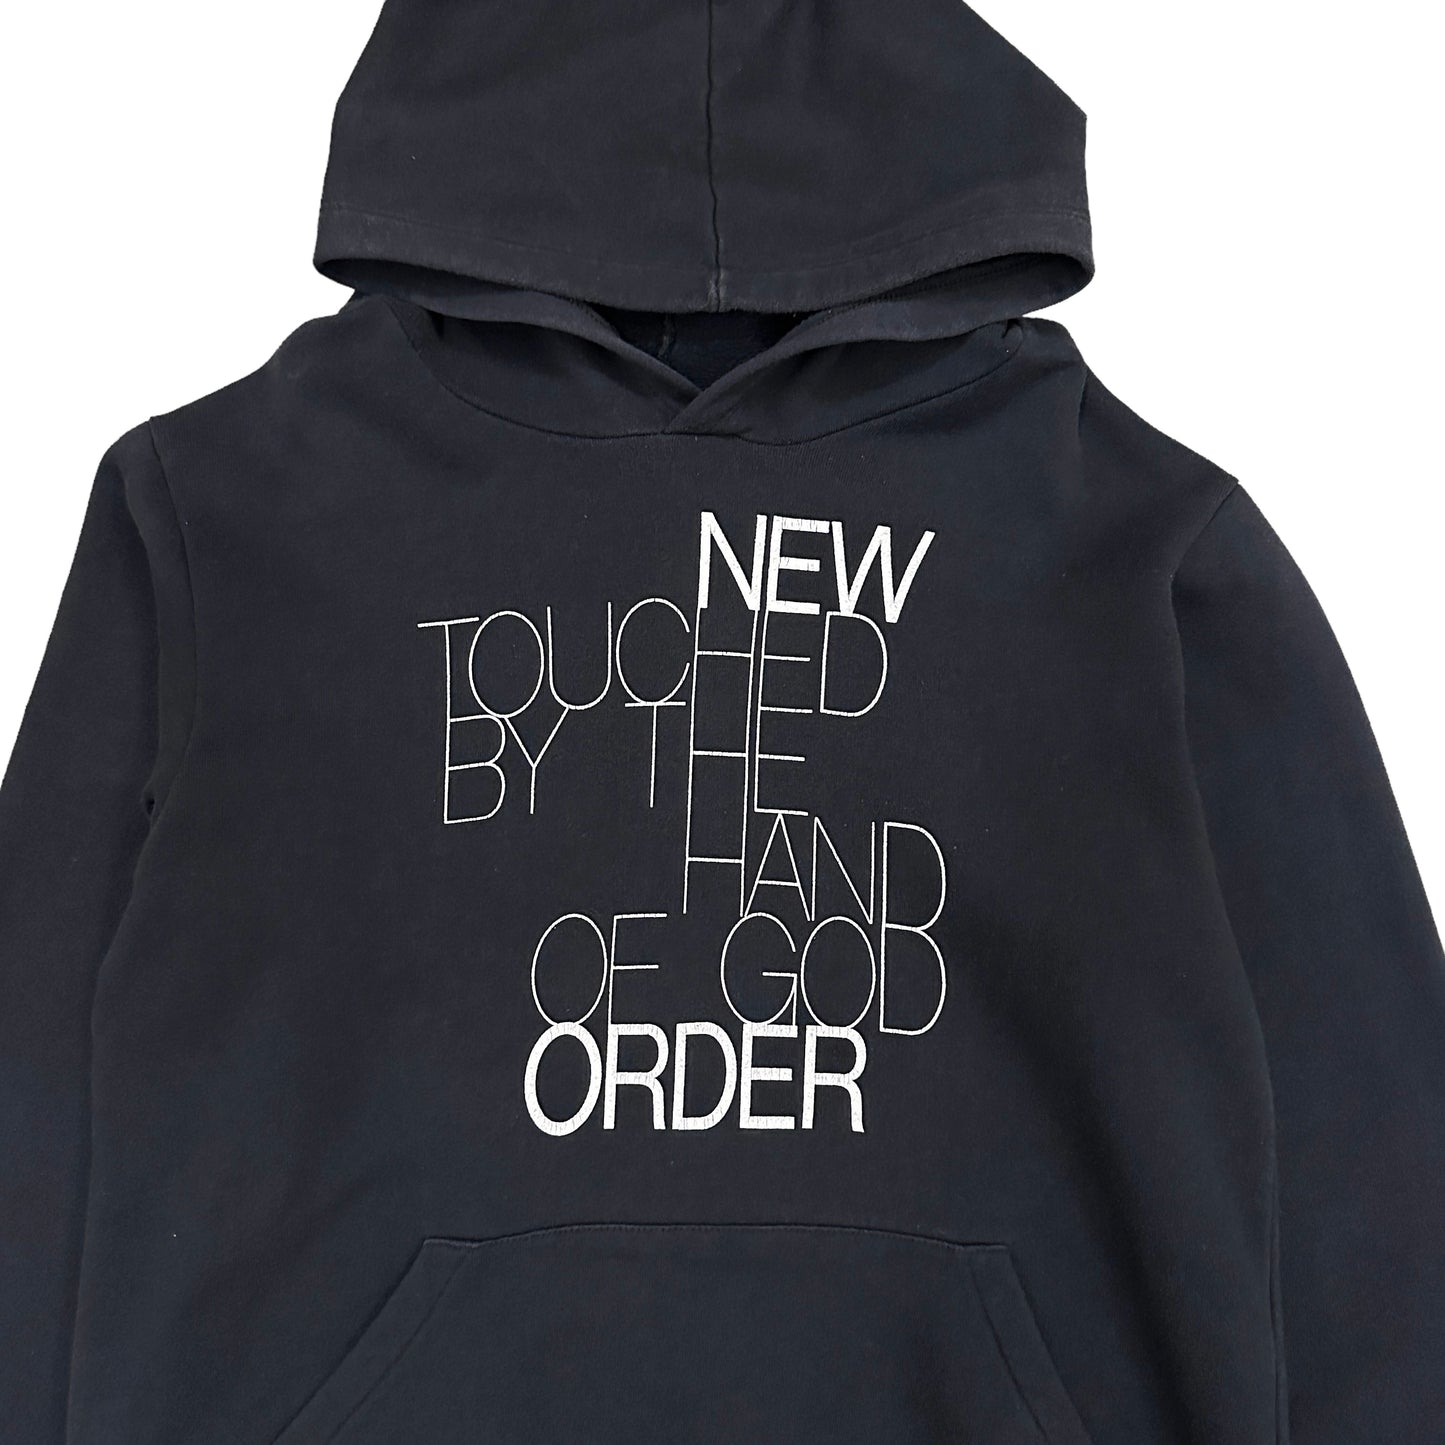 RAF SIMONS / 2003AW NEW ORDER "TOUCHED BY THE HAND OF GOD" HOODIE